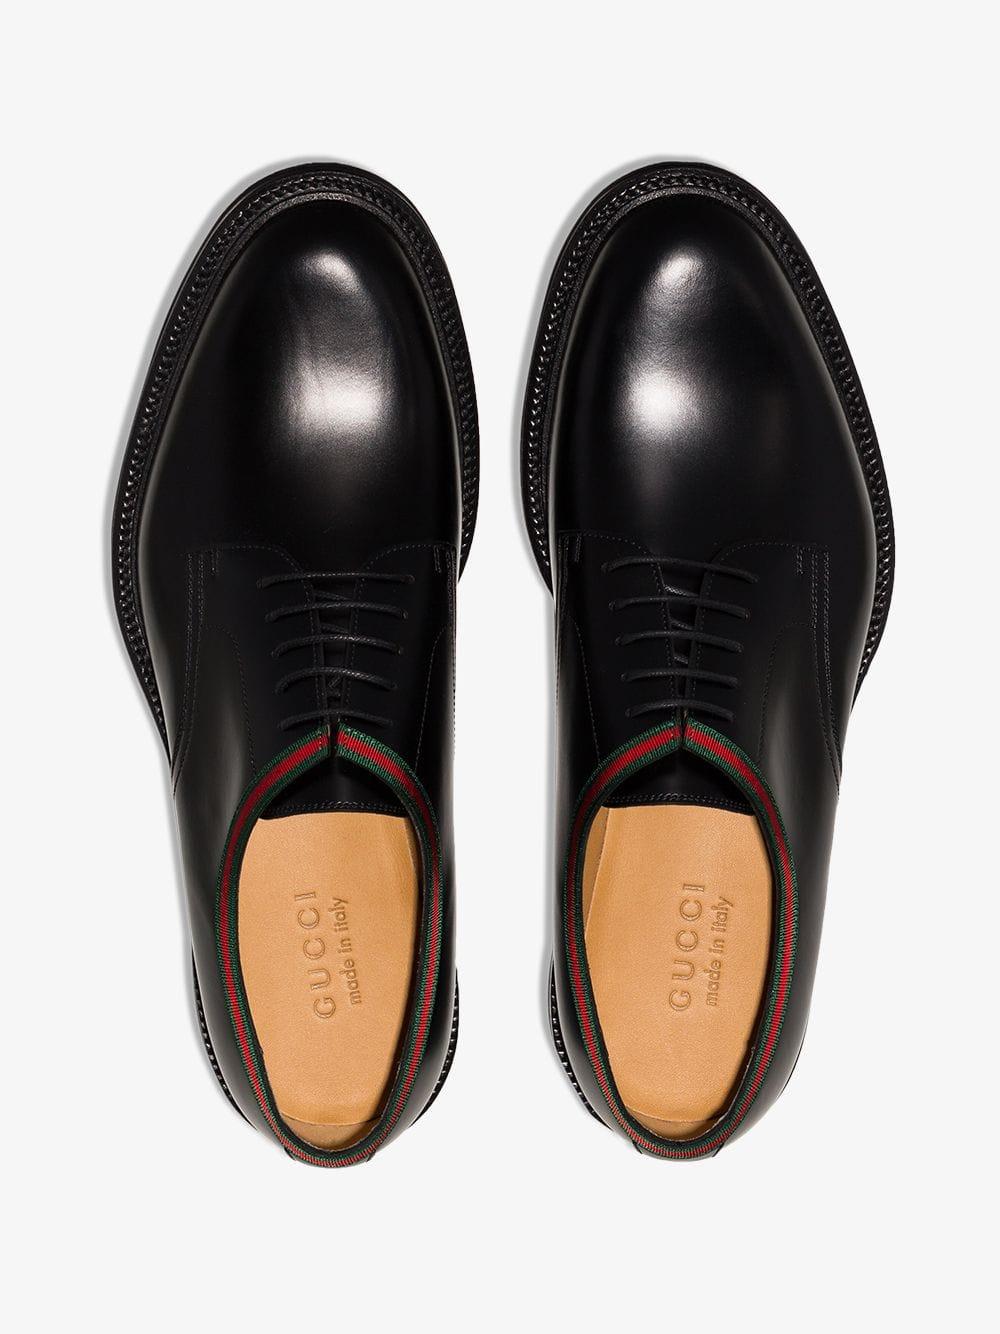 Gucci Leather Beyond Web-trimmed Derby Shoes in Black for Men - Lyst